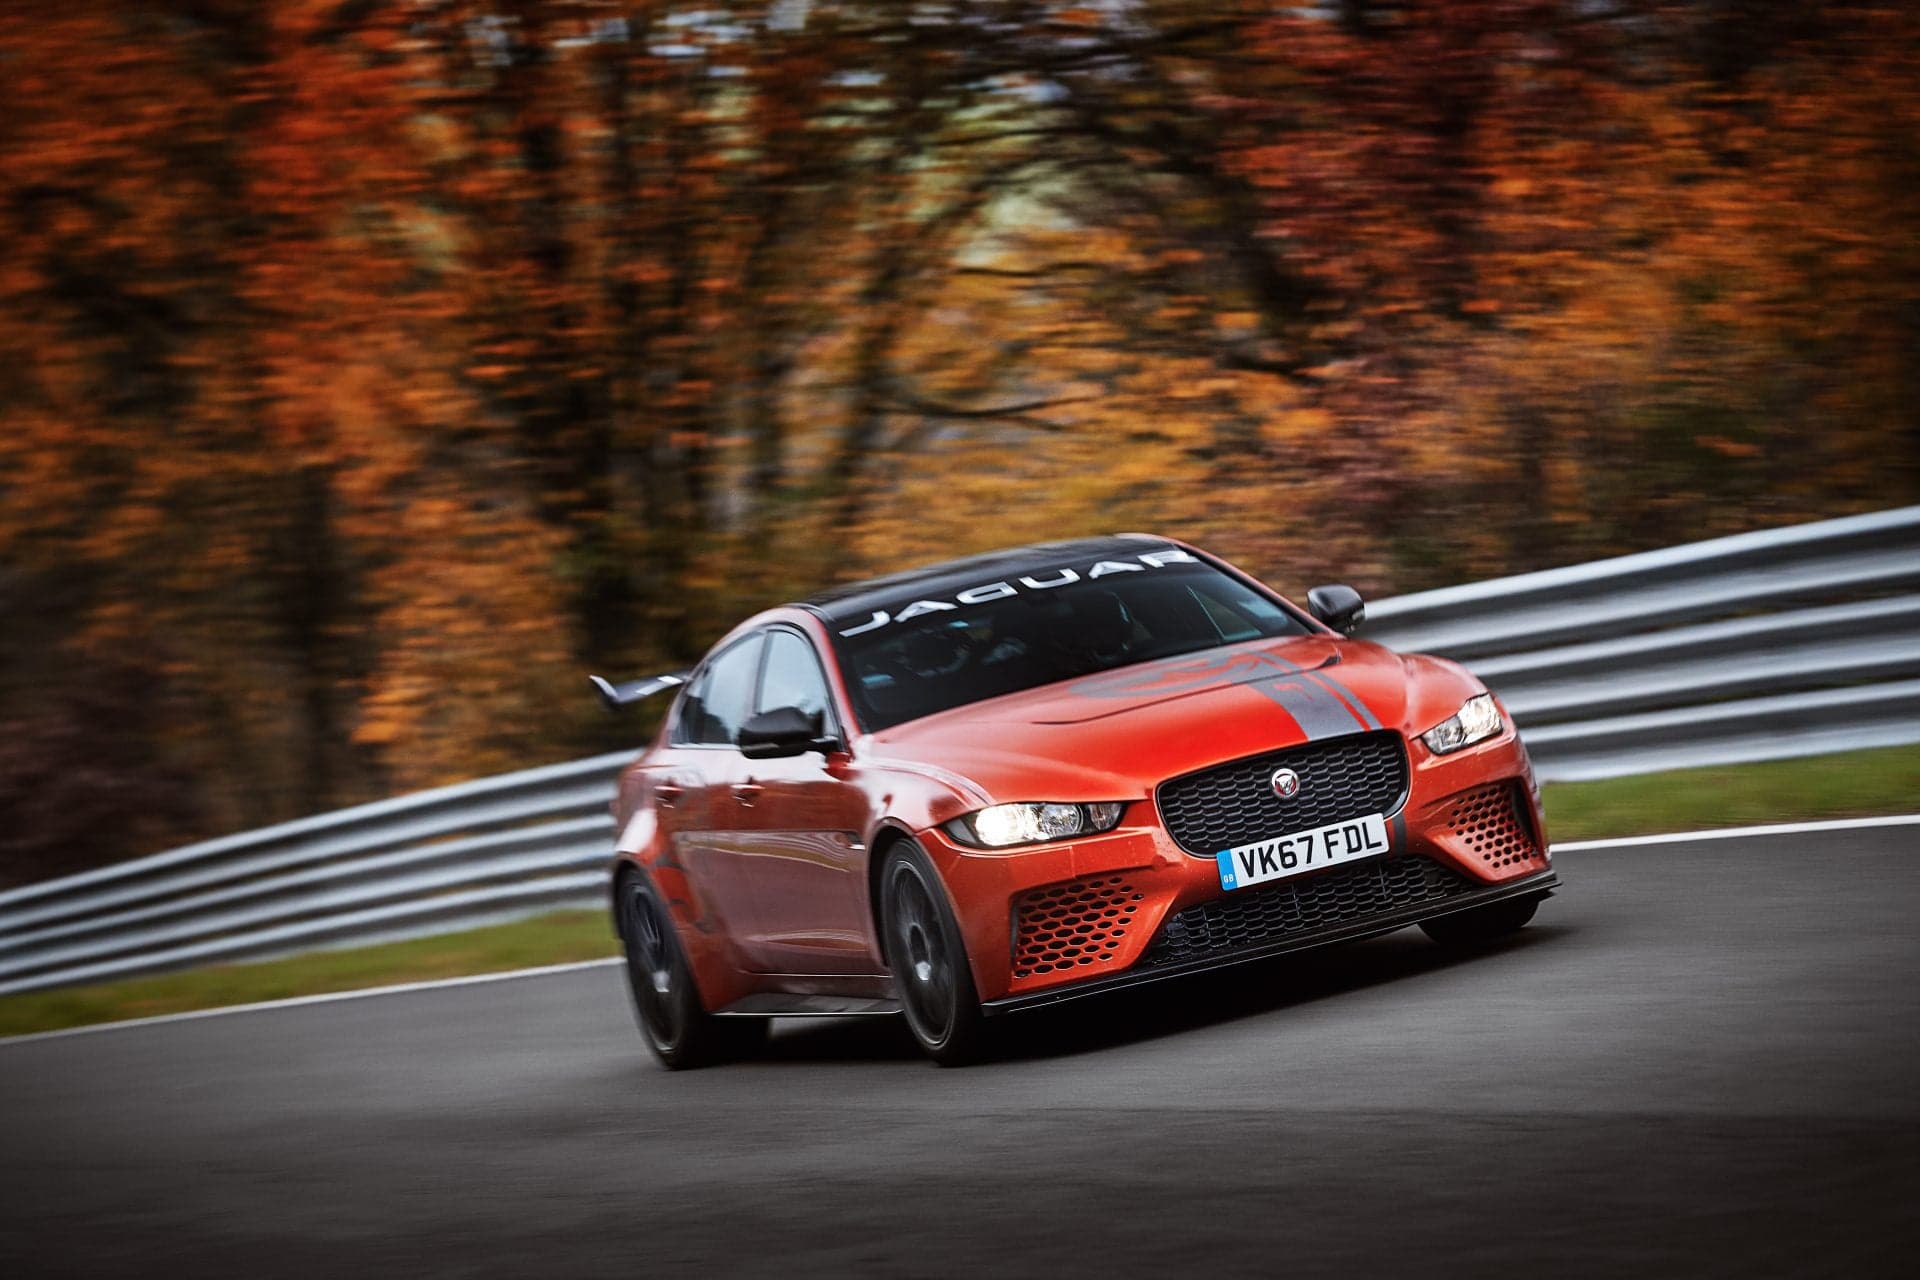 The Jaguar XE SV Project 8 Is the Fastest 4-Door Sedan* Around the ‘Ring